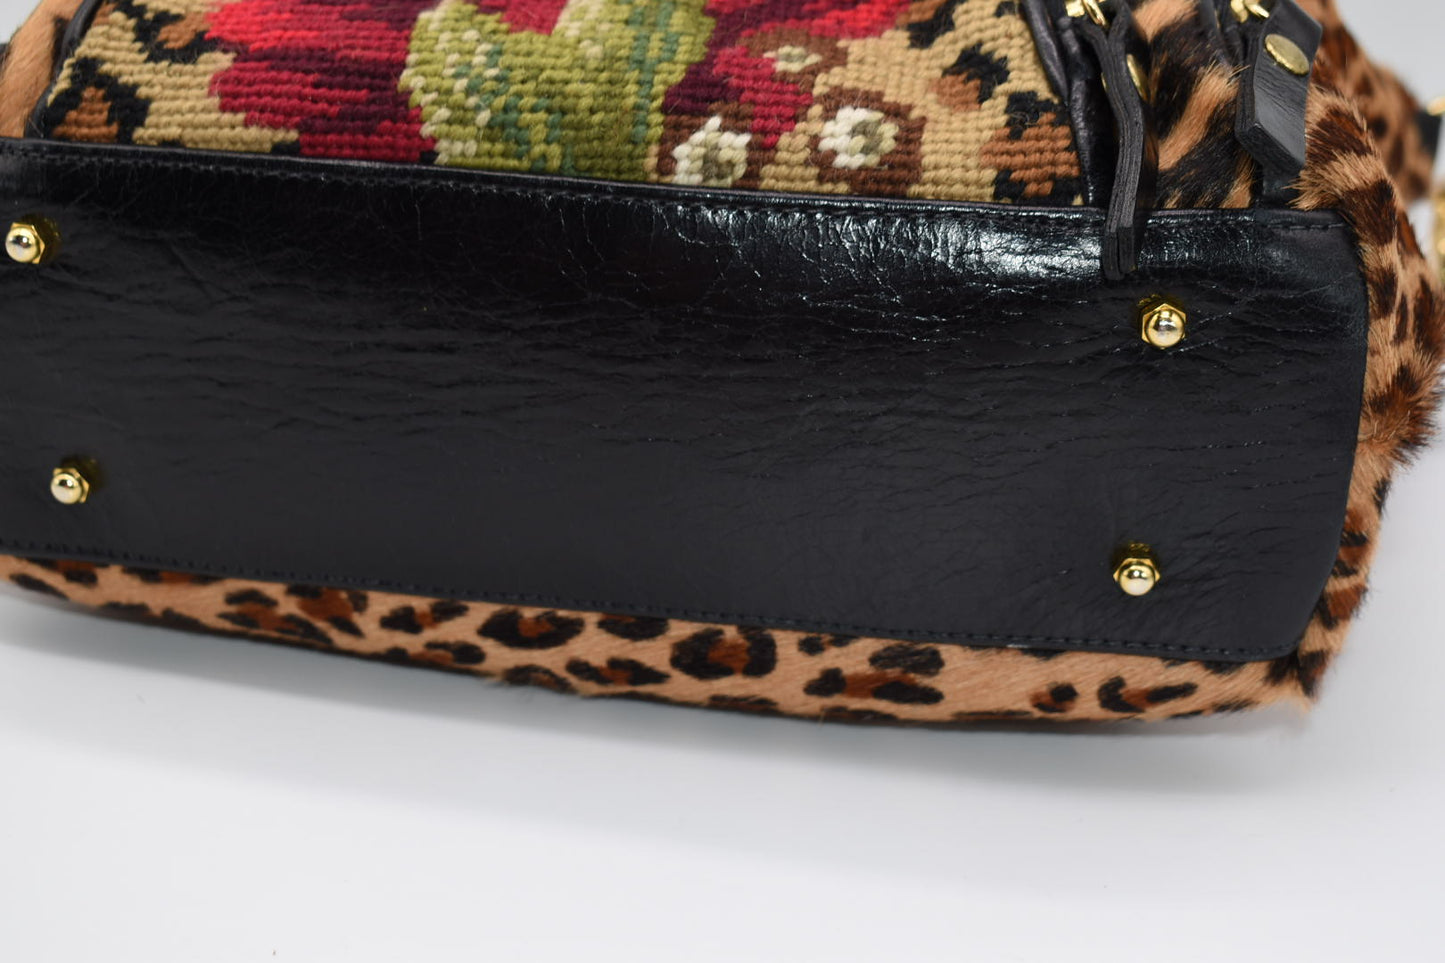 Clever Carriage Company Leopard & Hand Needlepoint Satchel Bag